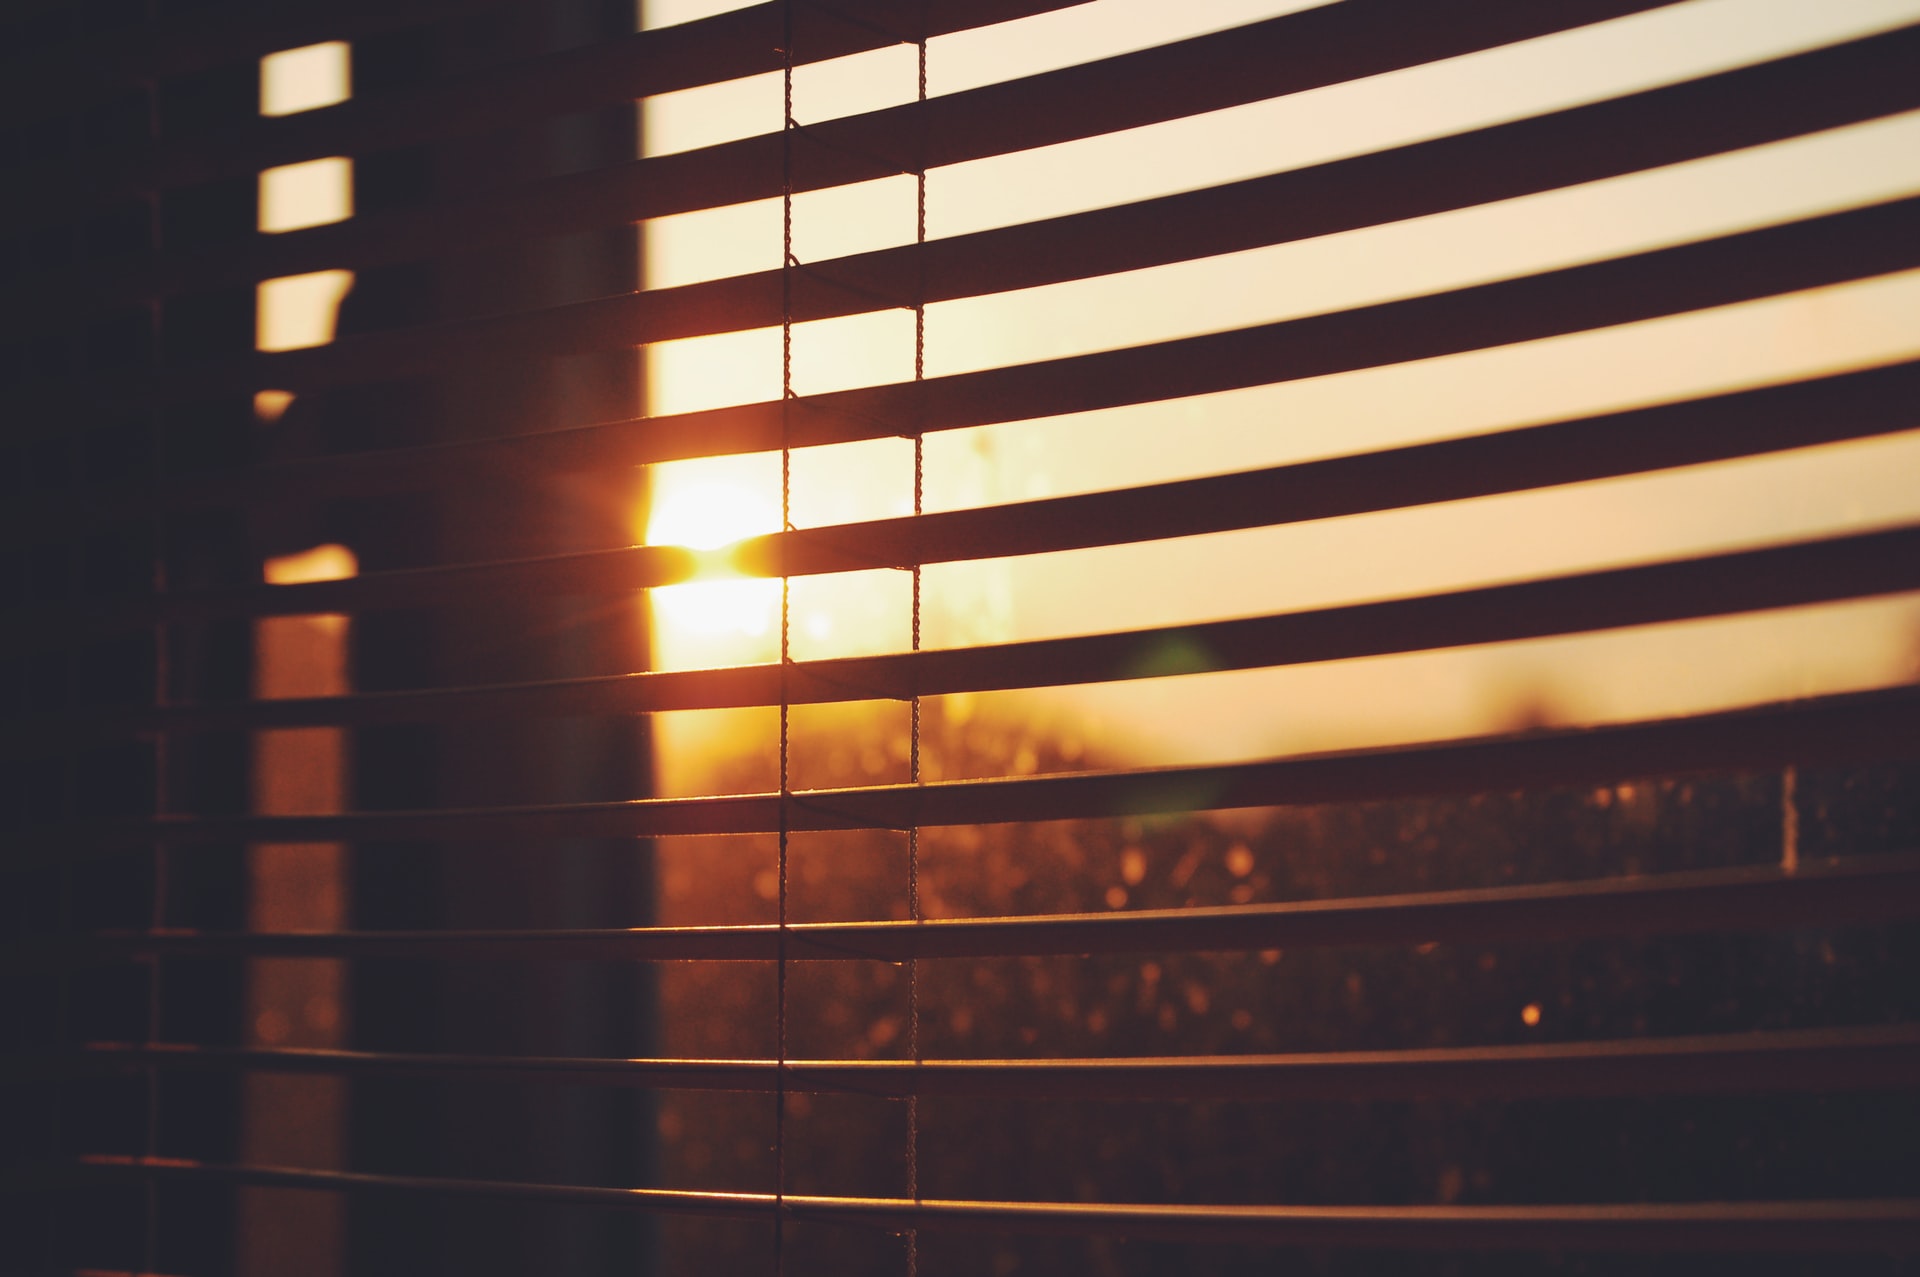 Window blinds open during sunset